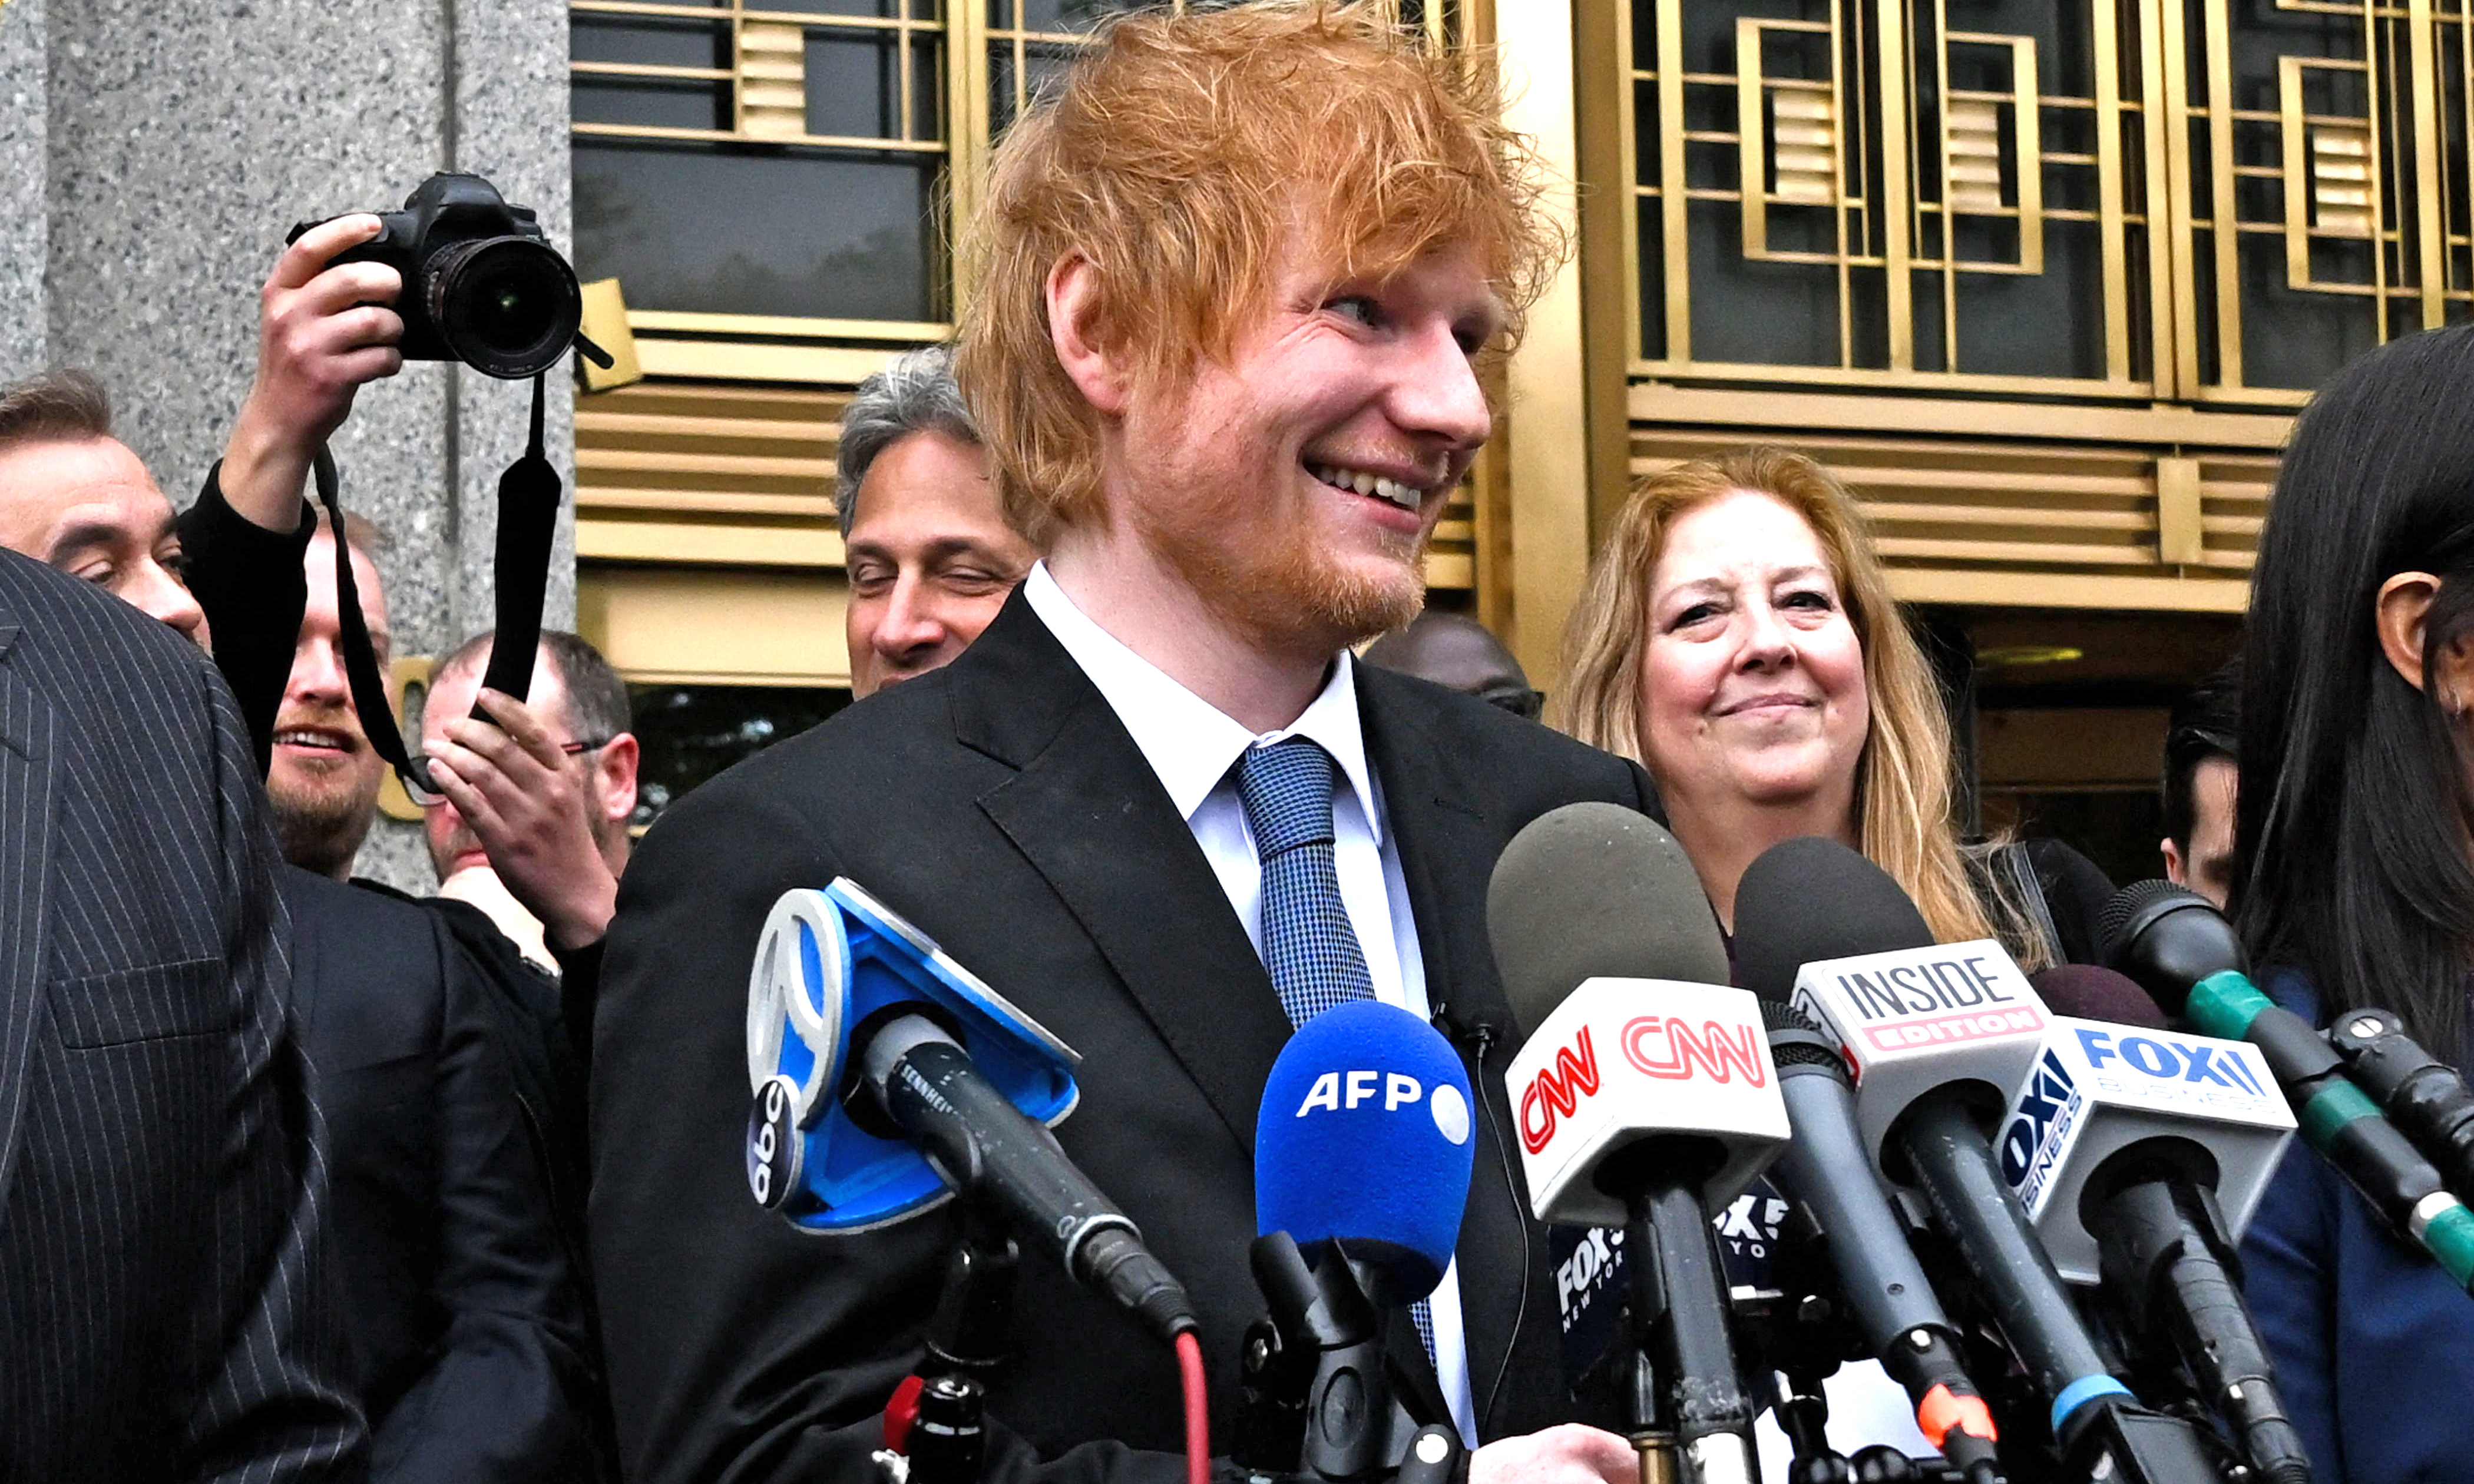 Ed Sheeran leaves Manhattan Federal Court and speaks to members of the media after he was found not guilty in a music copyright trial.